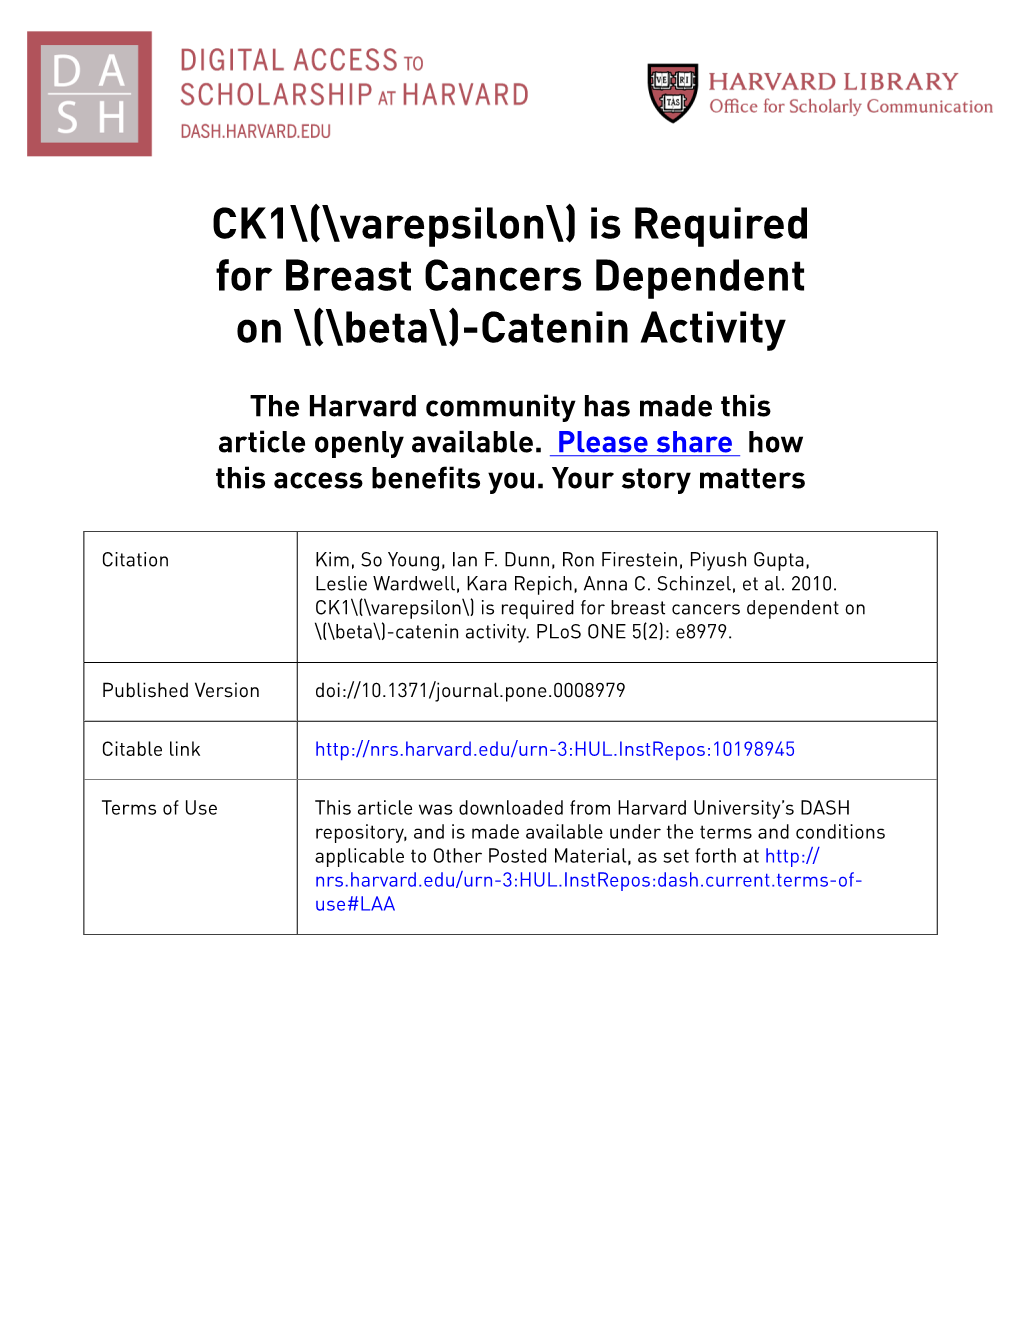 CK1\(\Varepsilon\) Is Required for Breast Cancers Dependent on \(\Beta\)-Catenin Activity